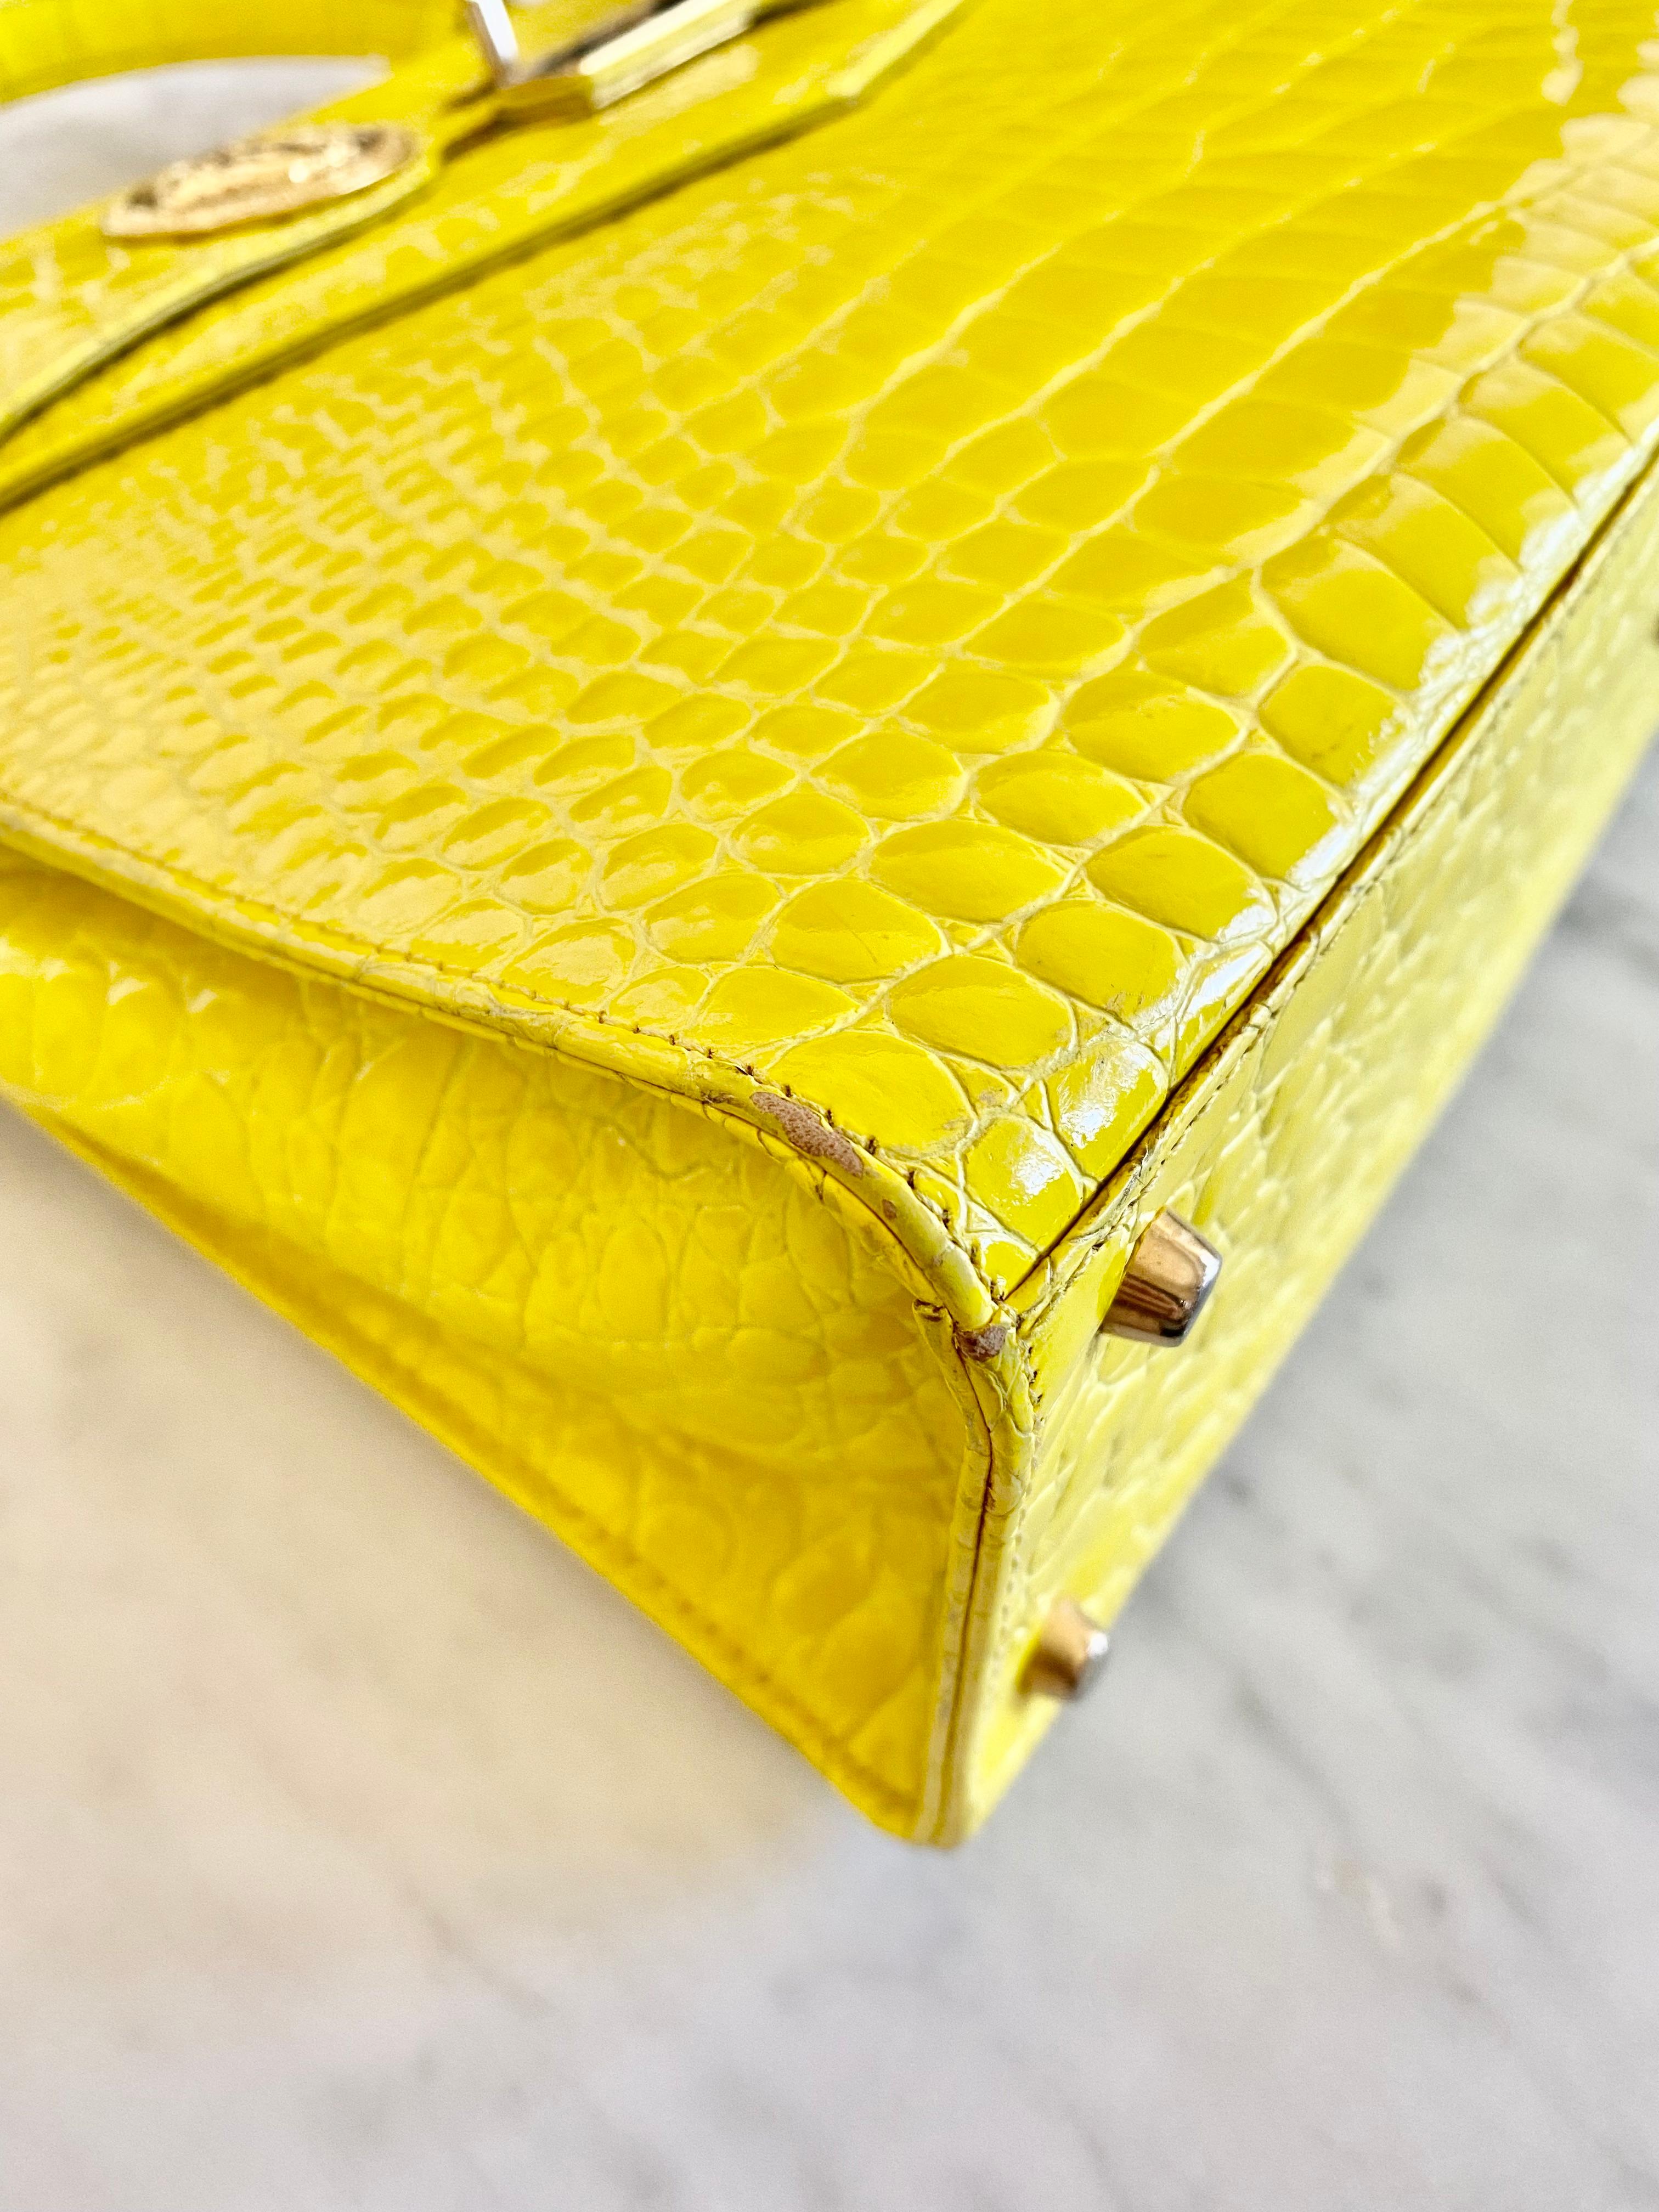 F/W 1994 Gianni Versace Yellow Crocodile Embossed Patent Kelly Style 'Diana' Bag For Sale 6